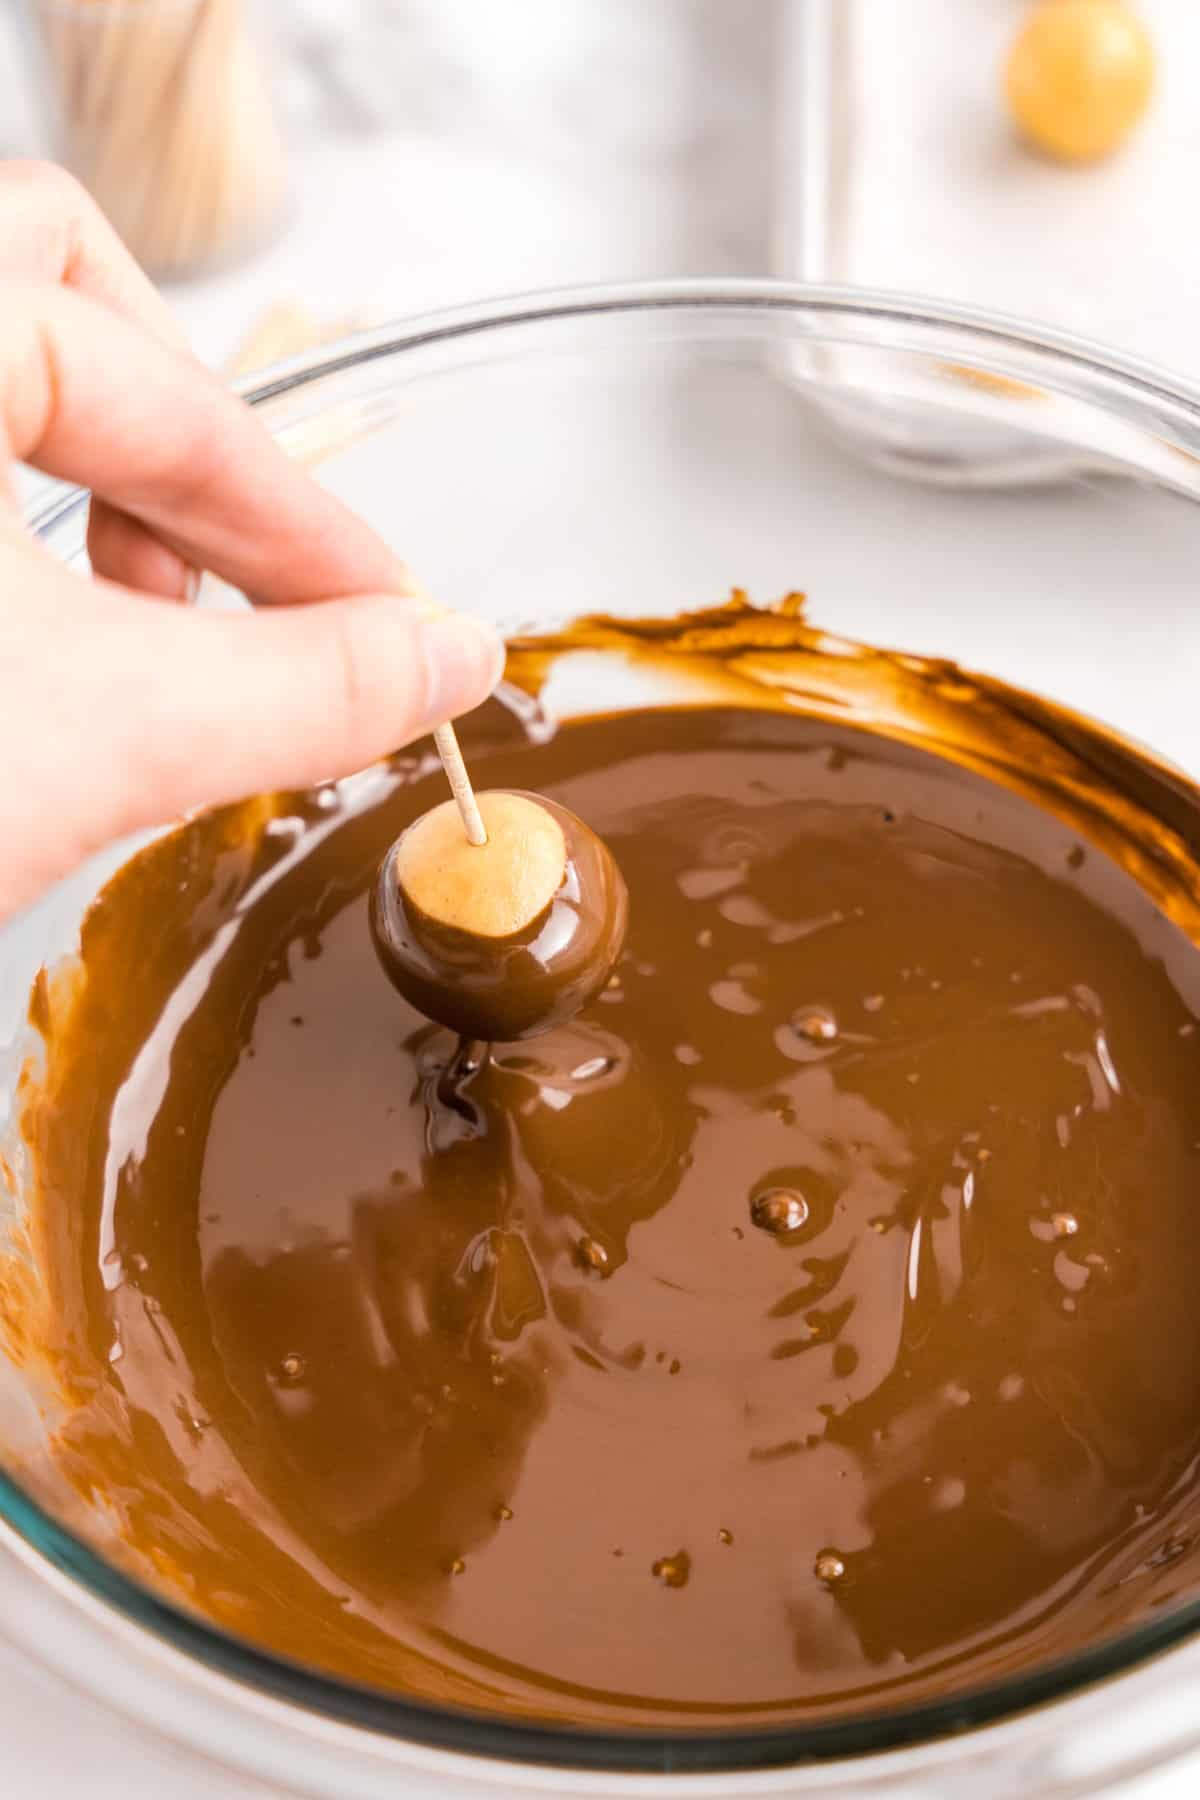 Dipping peanut butter ball in melted chocolate